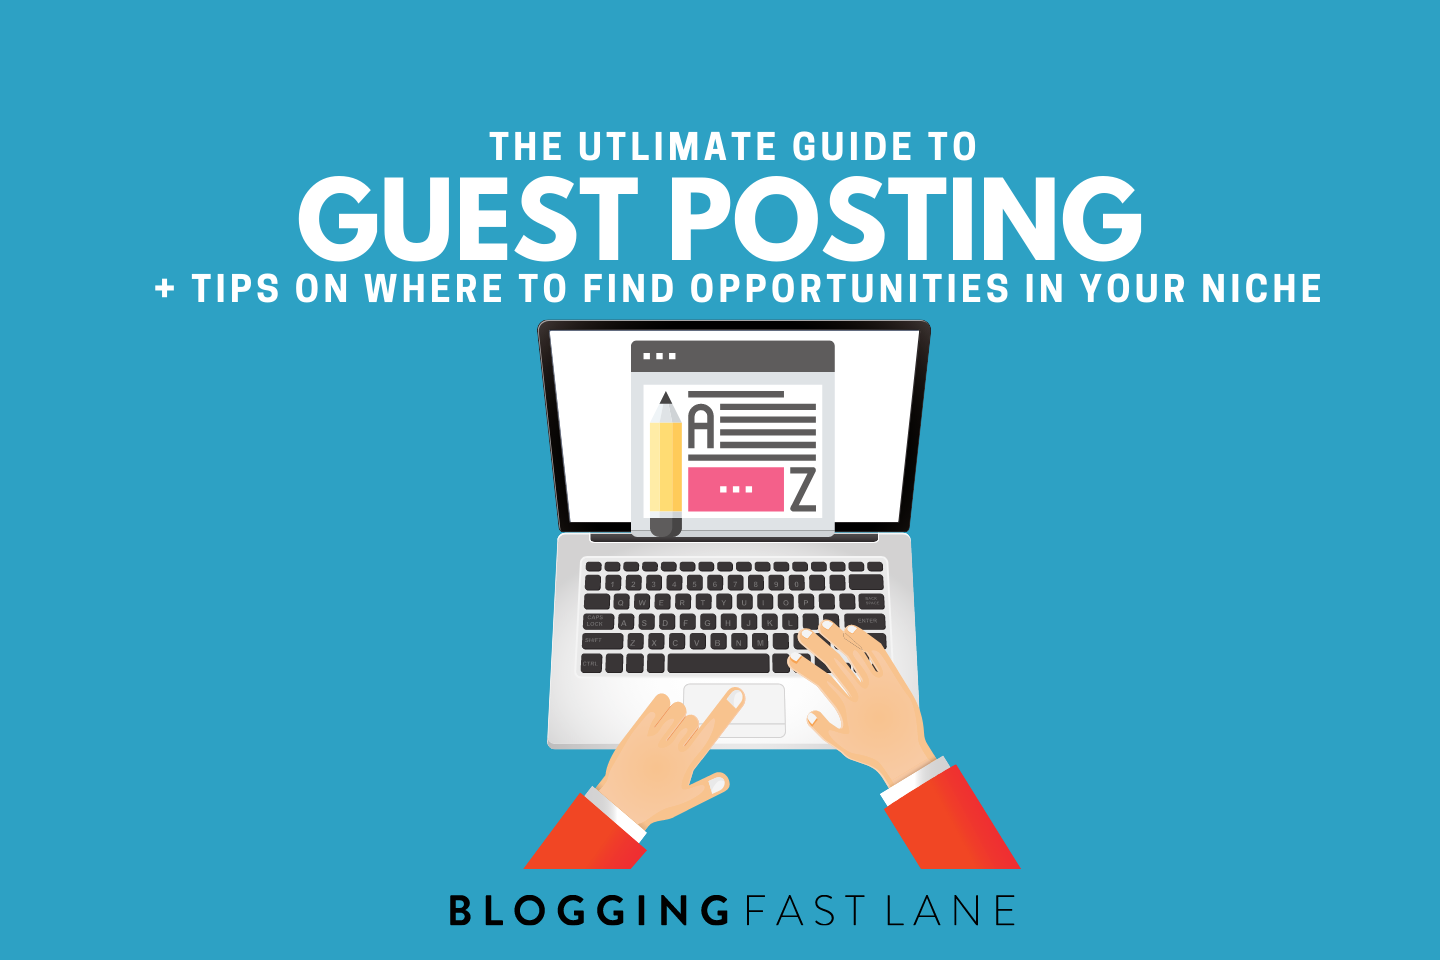 The Complete Guide to Guest Posting